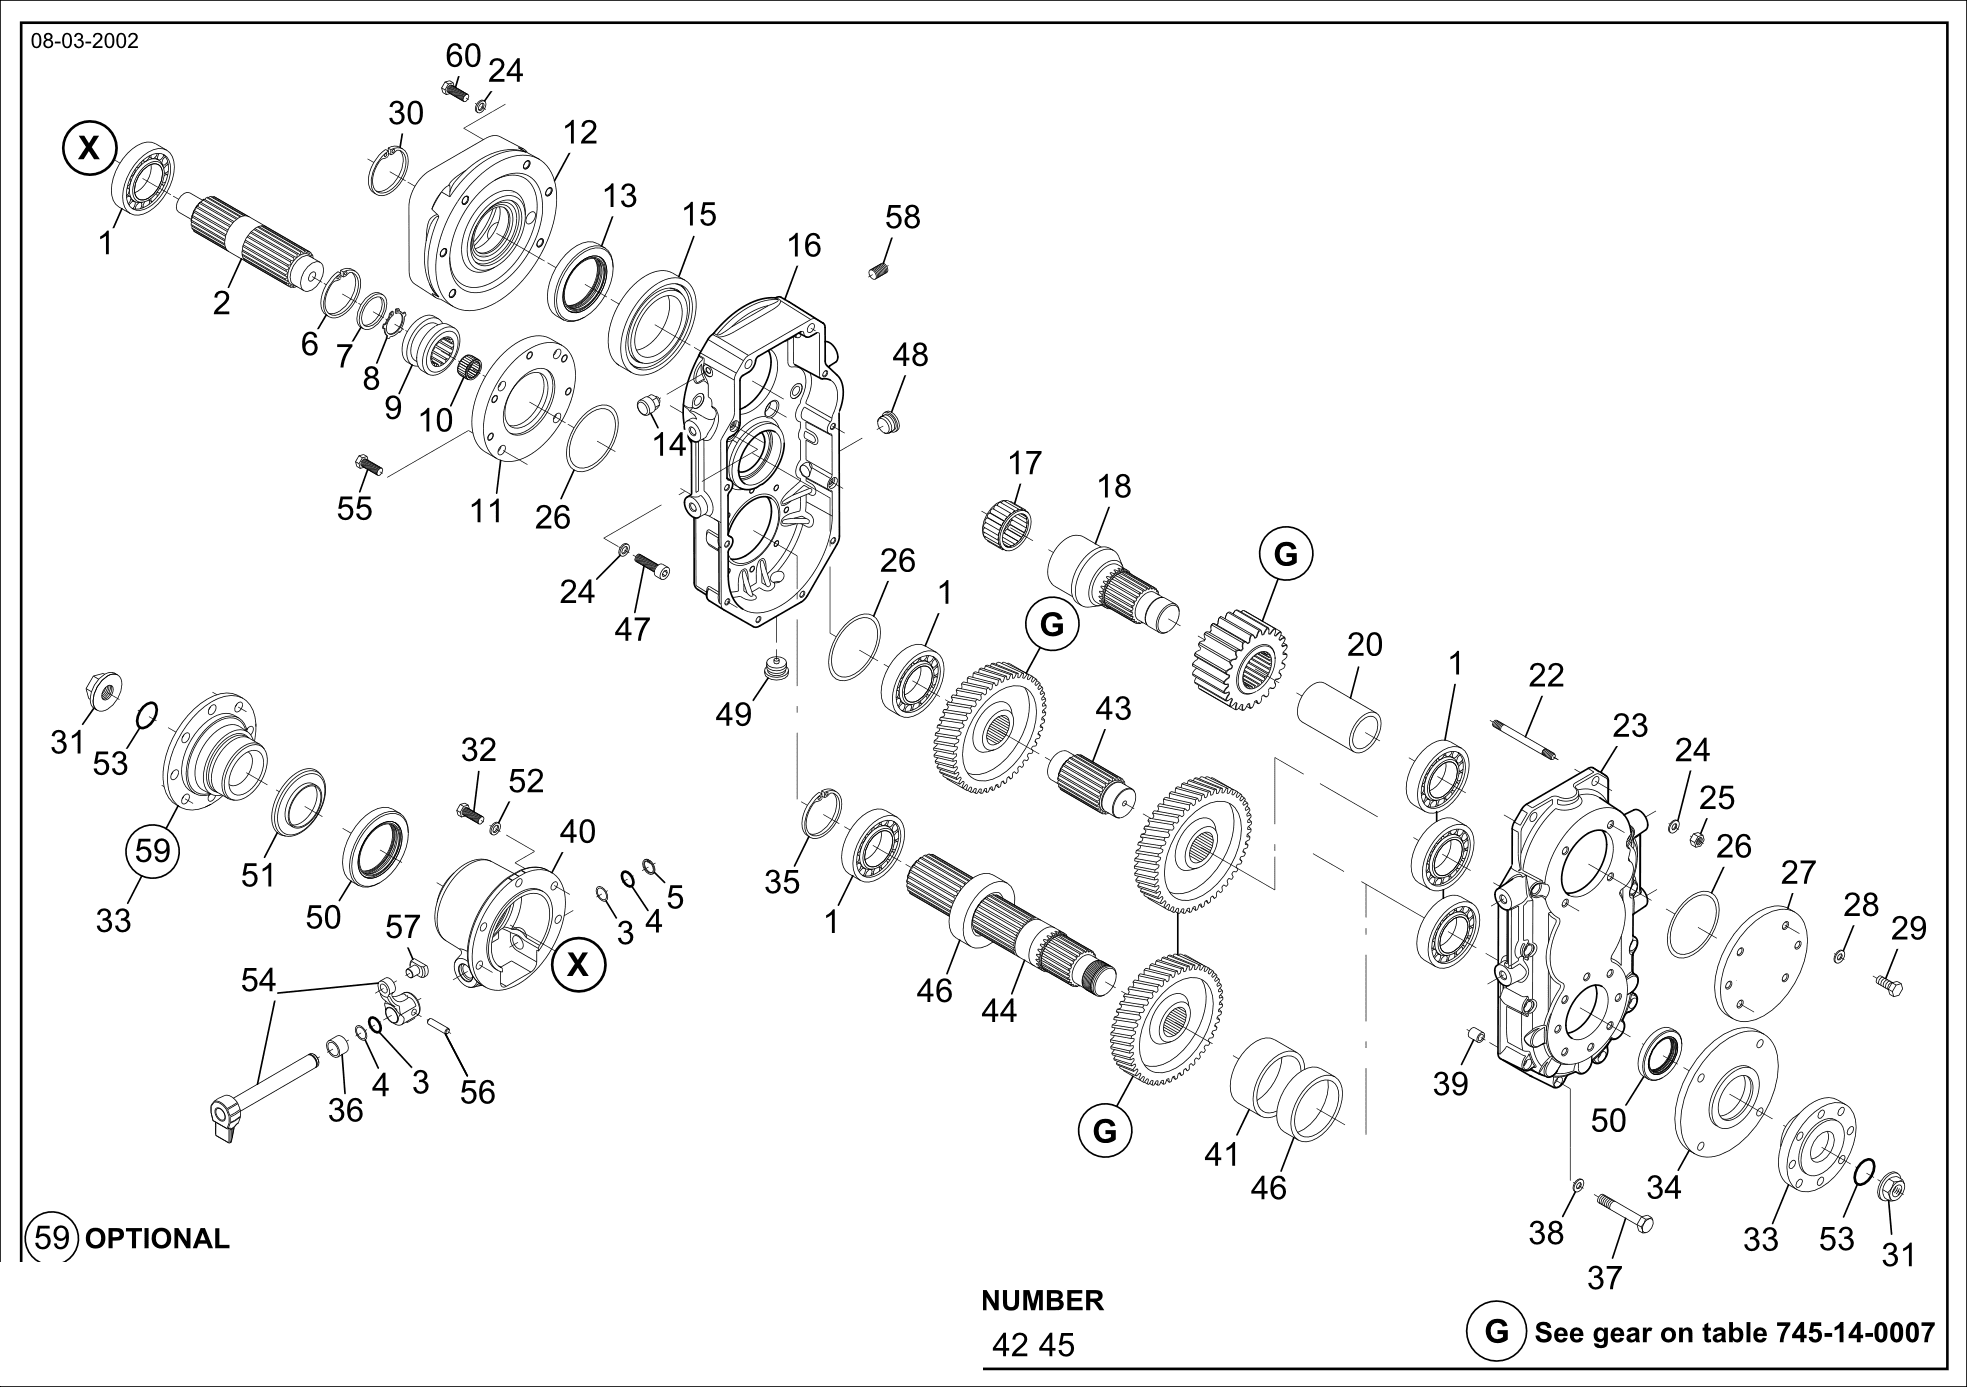 drawing for CNH NEW HOLLAND N13392 - CIRCLIP (figure 5)